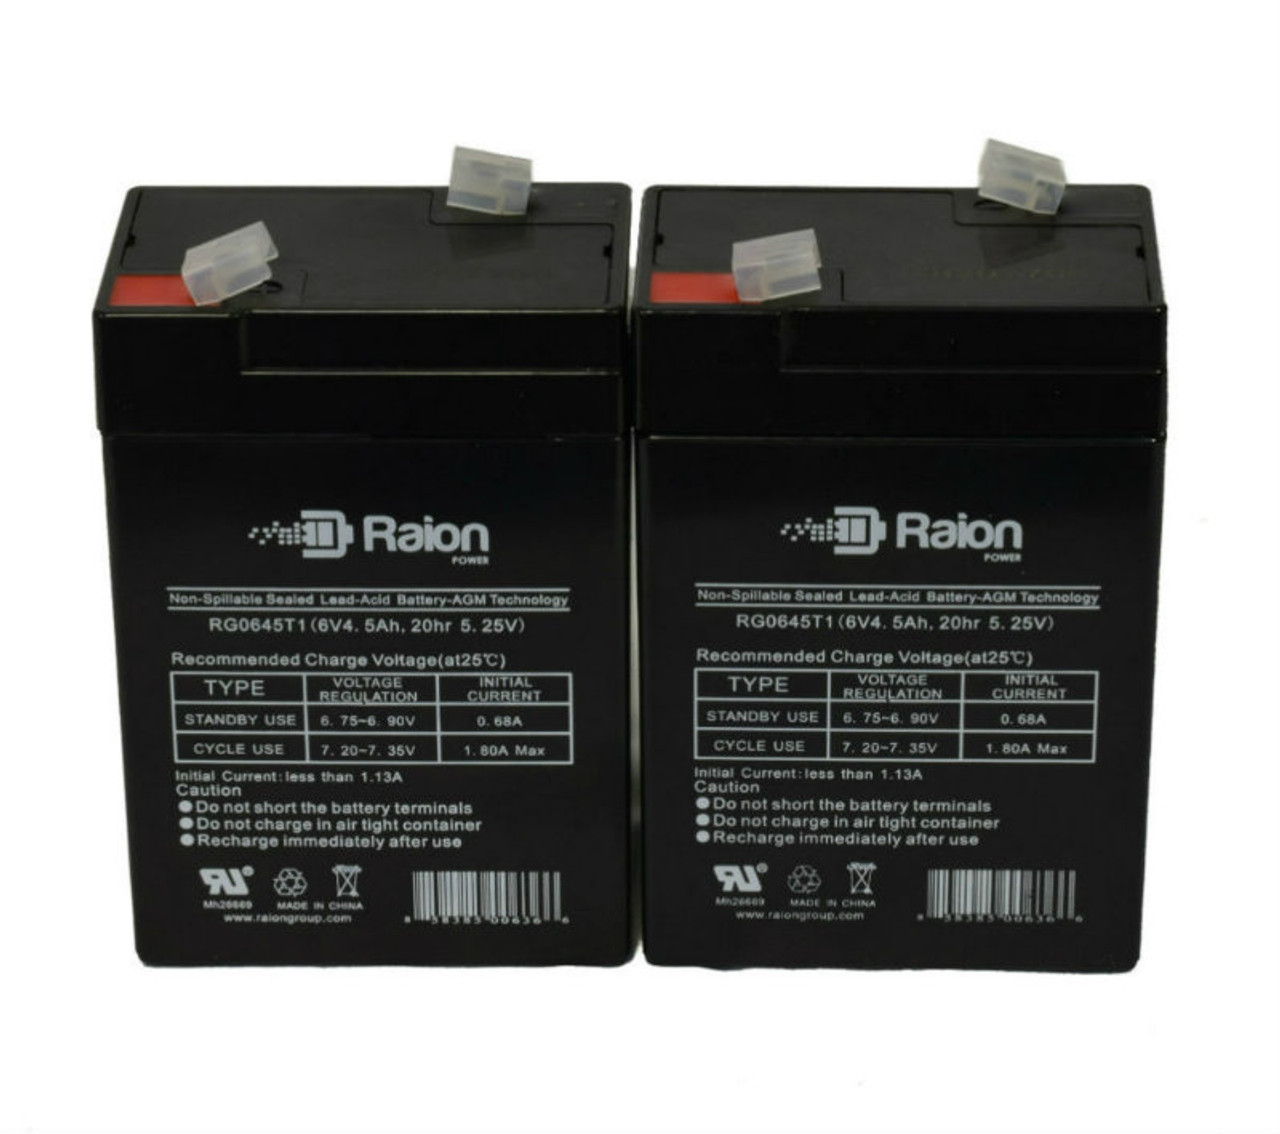 Raion Power 6V 4.5Ah Replacement Emergency Light Battery for Astralite 20-0008 - 2 Pack